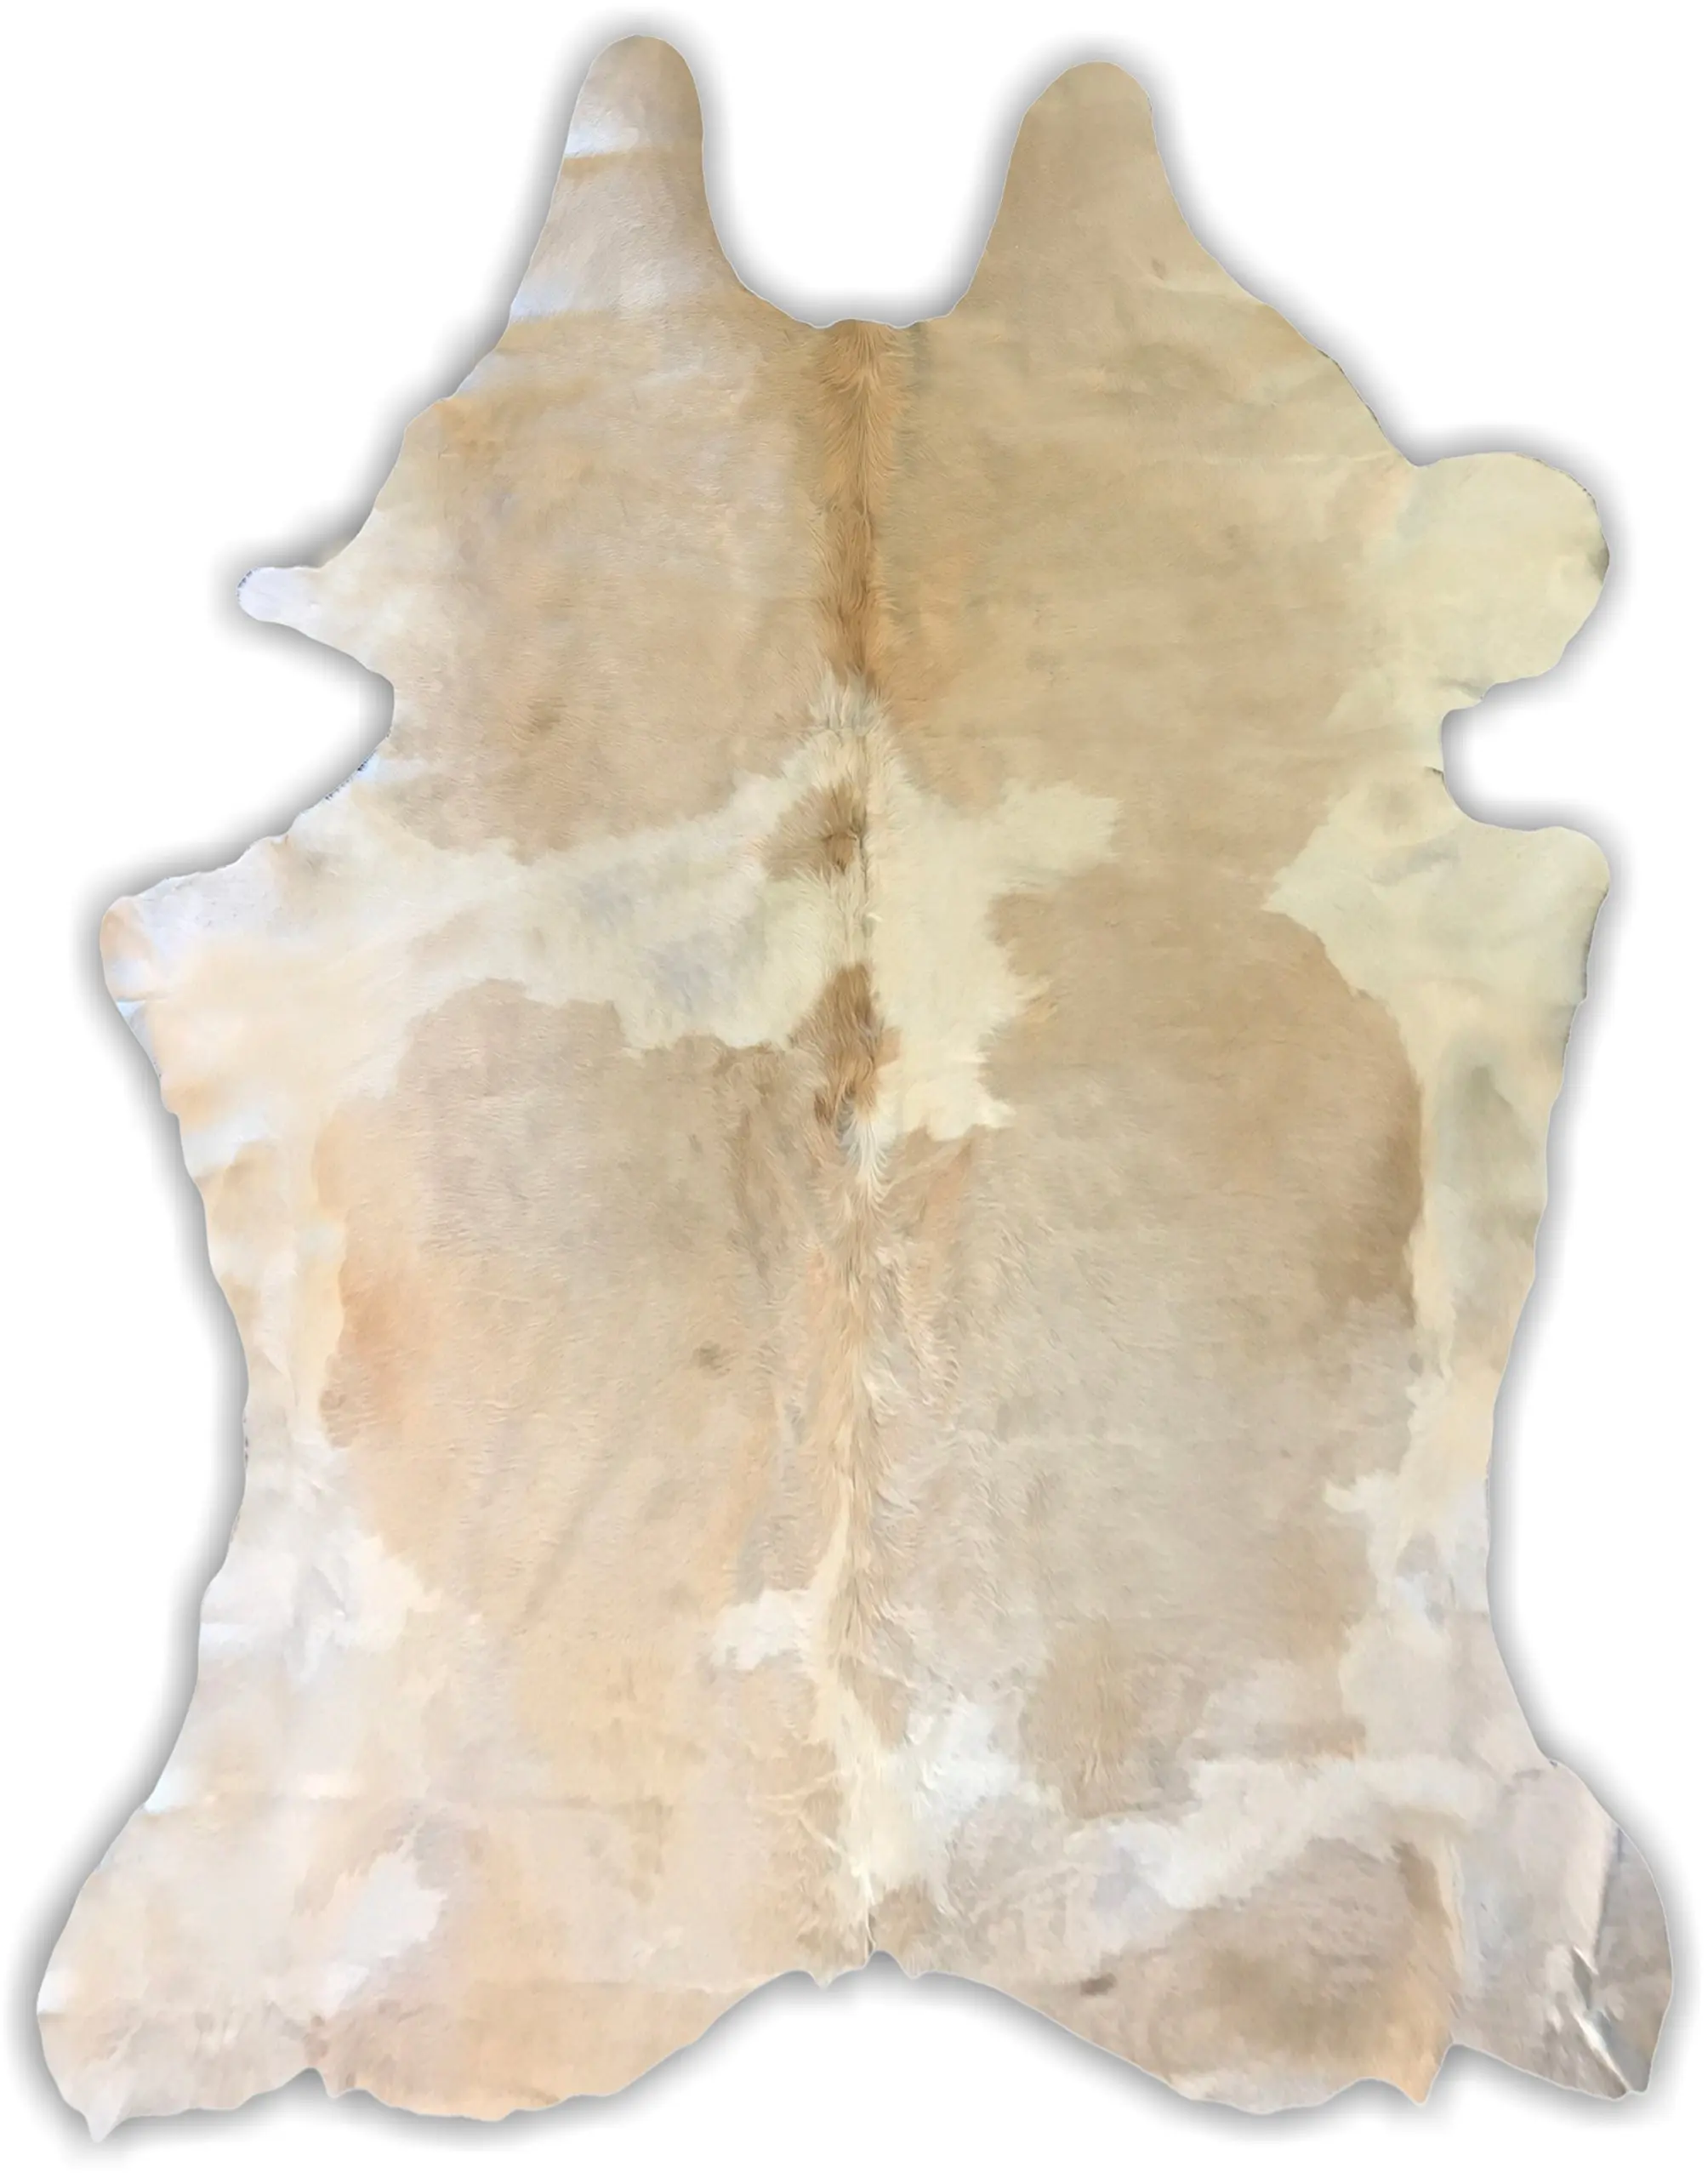 Cheap Real Cowhide Rugs Find Real Cowhide Rugs Deals On Line At